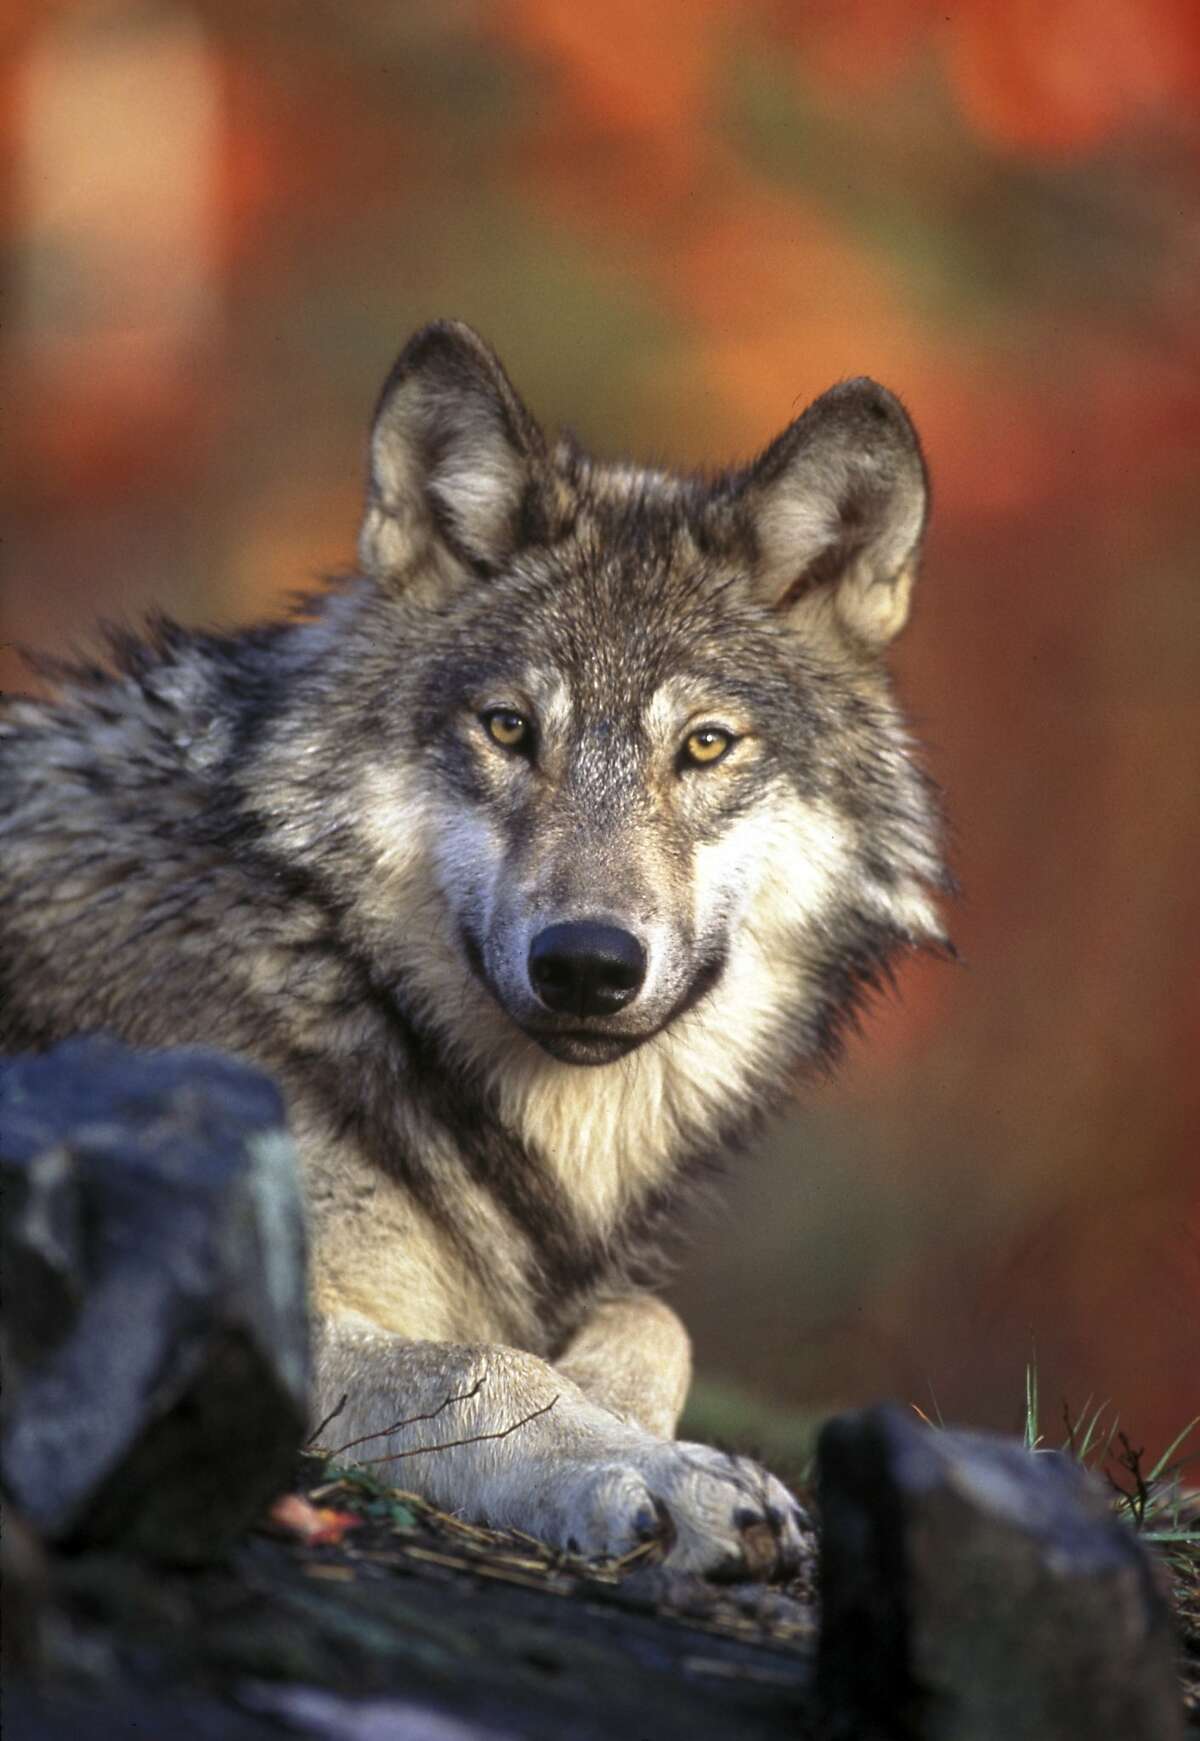 This undated handout photo provided by the U.S. Fish and Wildlife Service shows a gray wolf. An environmental group has filed notice that it will sue the federal government to force it to adopt a plan for the recovery of gray wolves across the lower 48 states. Biologists with the Arizona-based Center for Biological Diversity said Tuesday, Dec. 21, 2010 they want to expand that recovery nationwide.